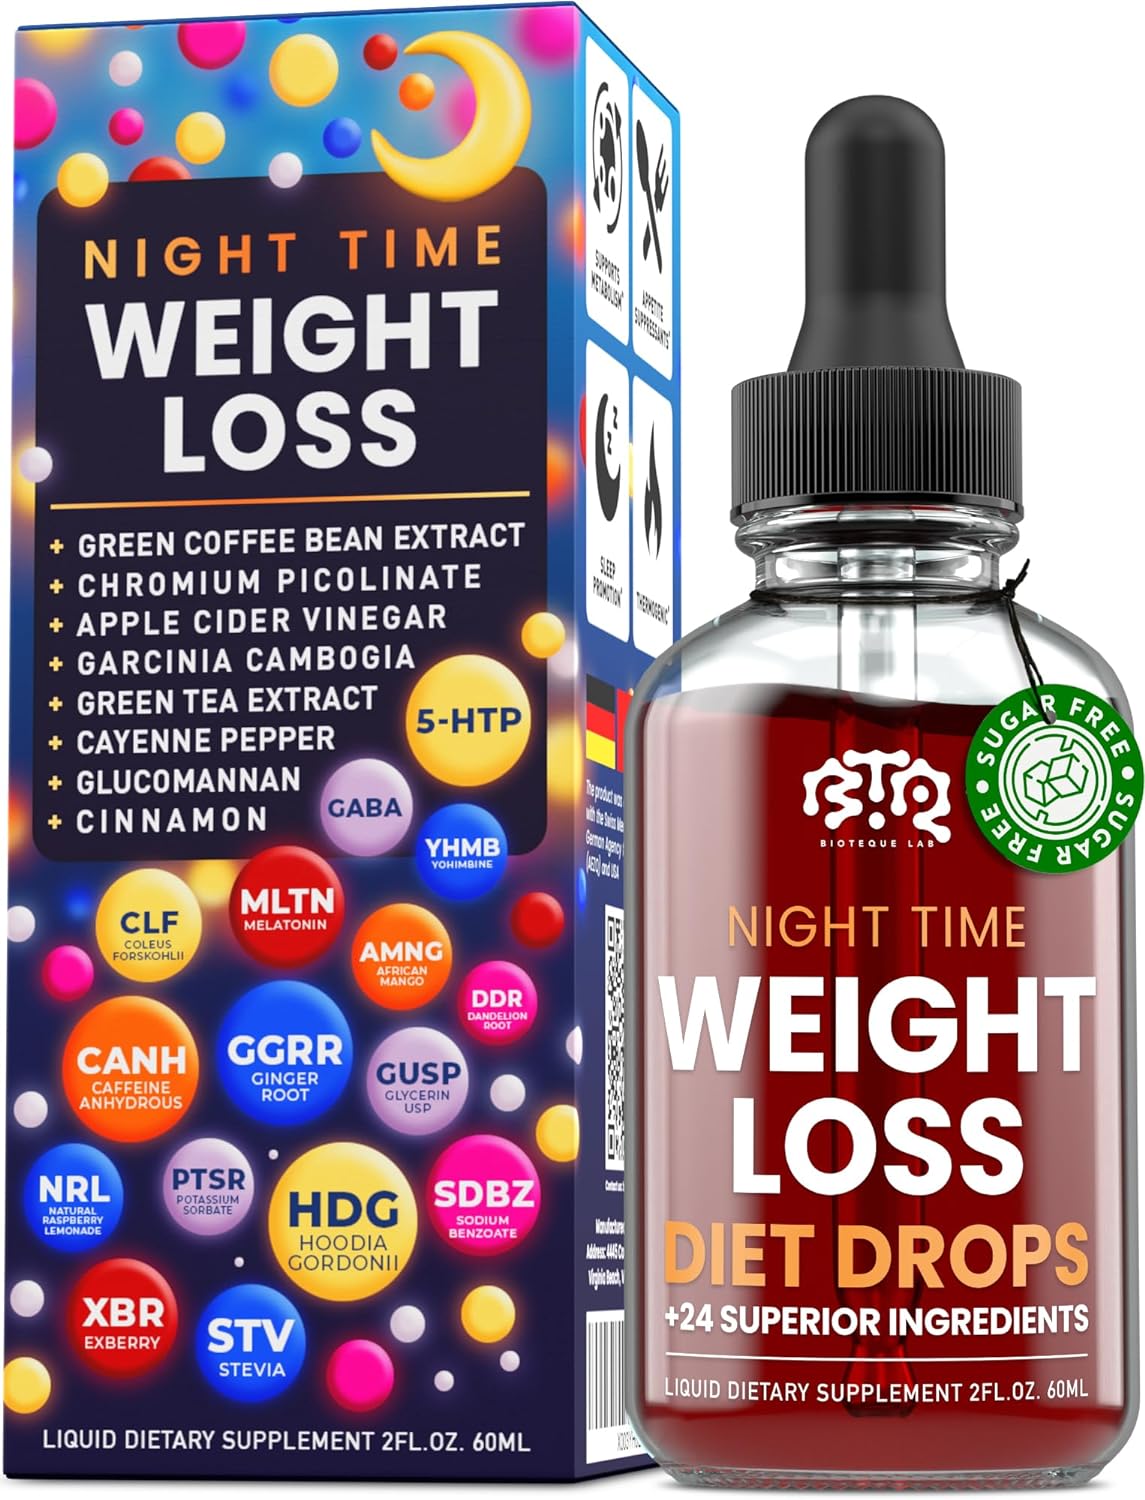 Night Time Weight Loss Diet Drops - Appetite Control, Fat Burner, Metabolism Booster - Apple Cider Vinegar - Cinnamon - Cayenne Pepper